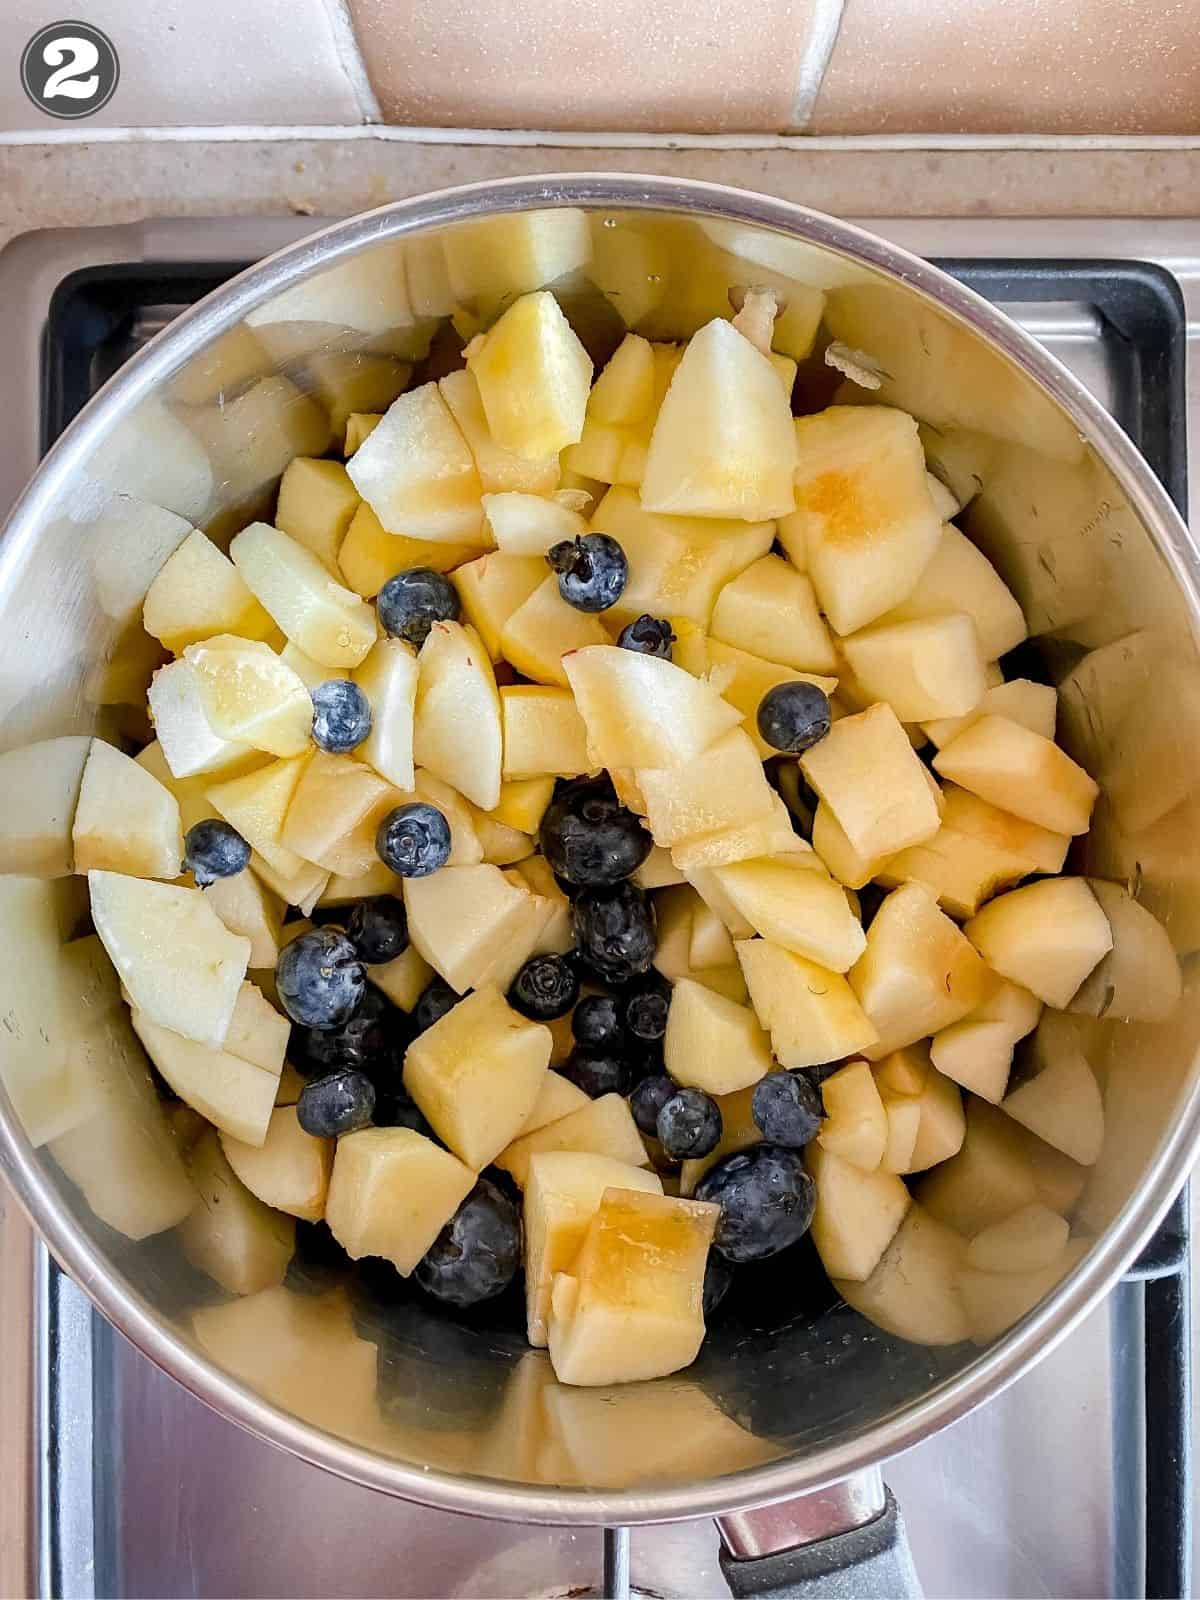 apples and blueberries in a pan before being cooked.